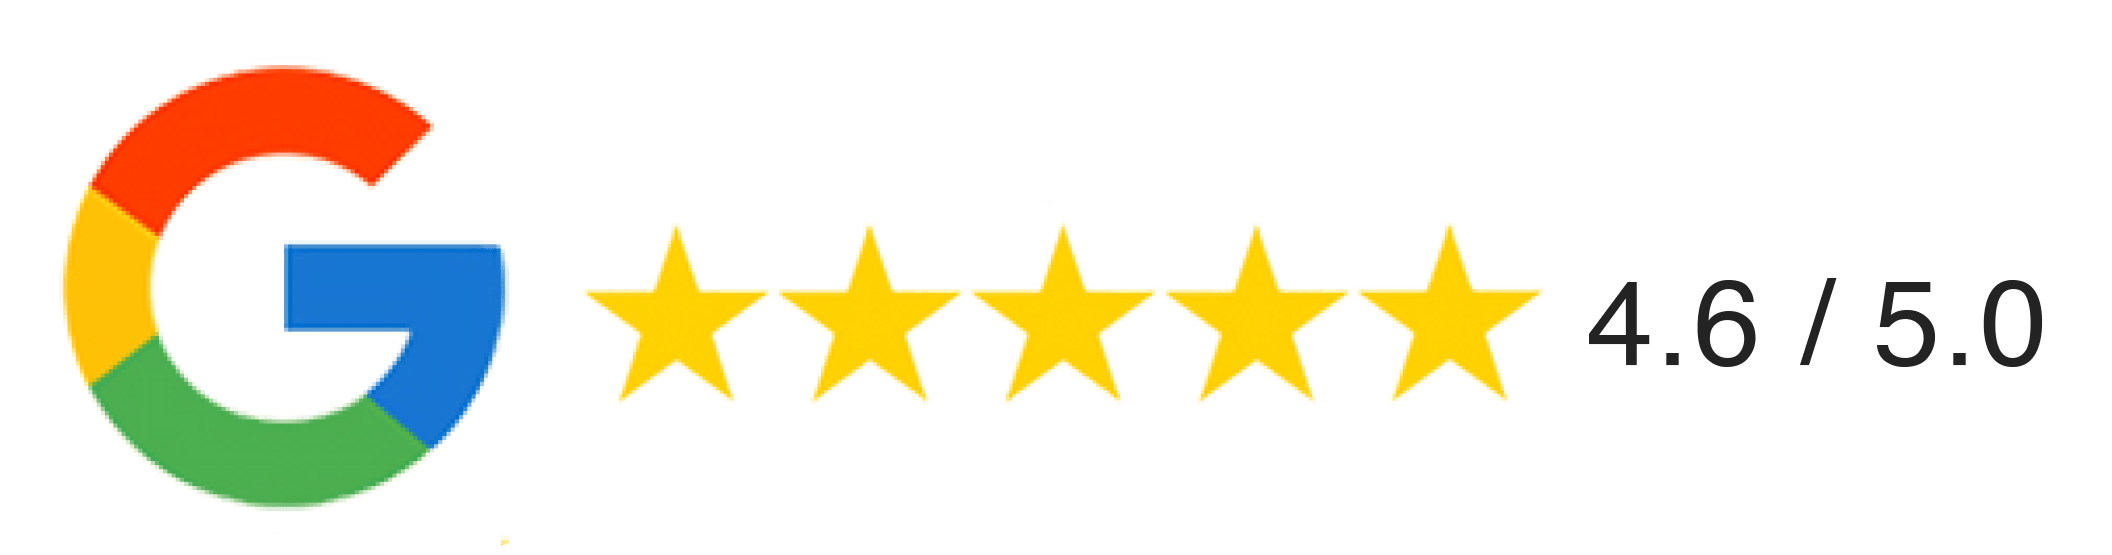 Google review 4.6/5.0